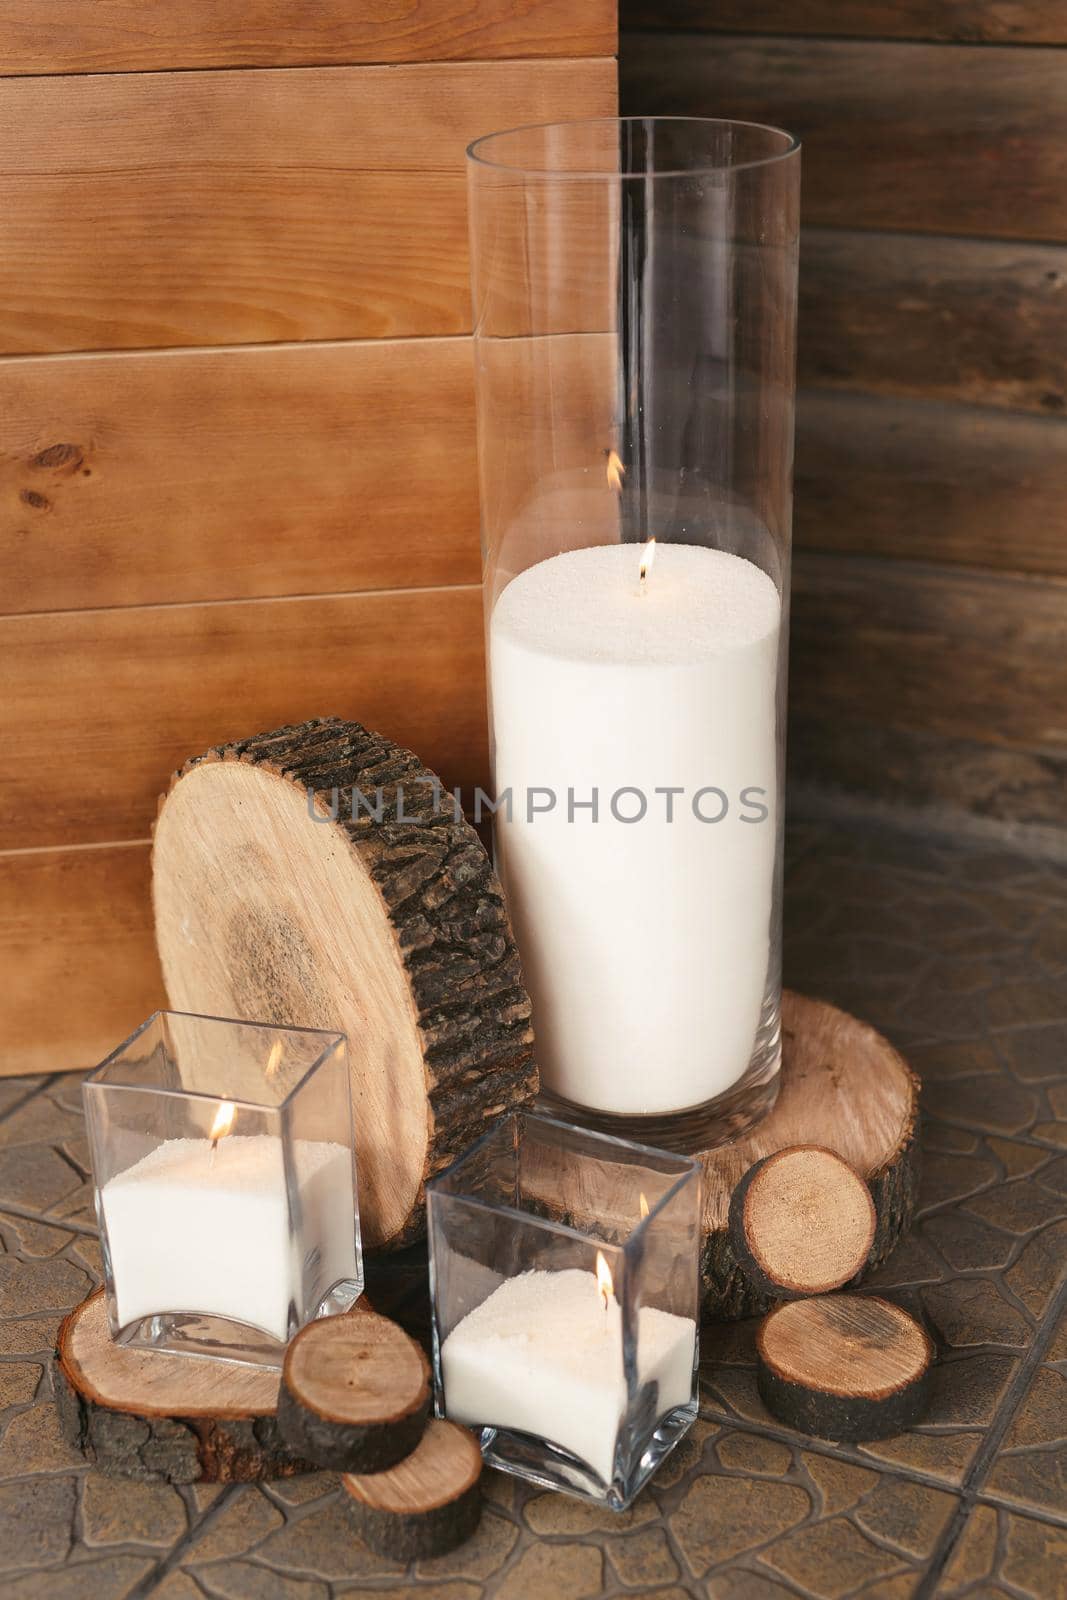 Wedding decor at the banquet. Candles and wooden logs.